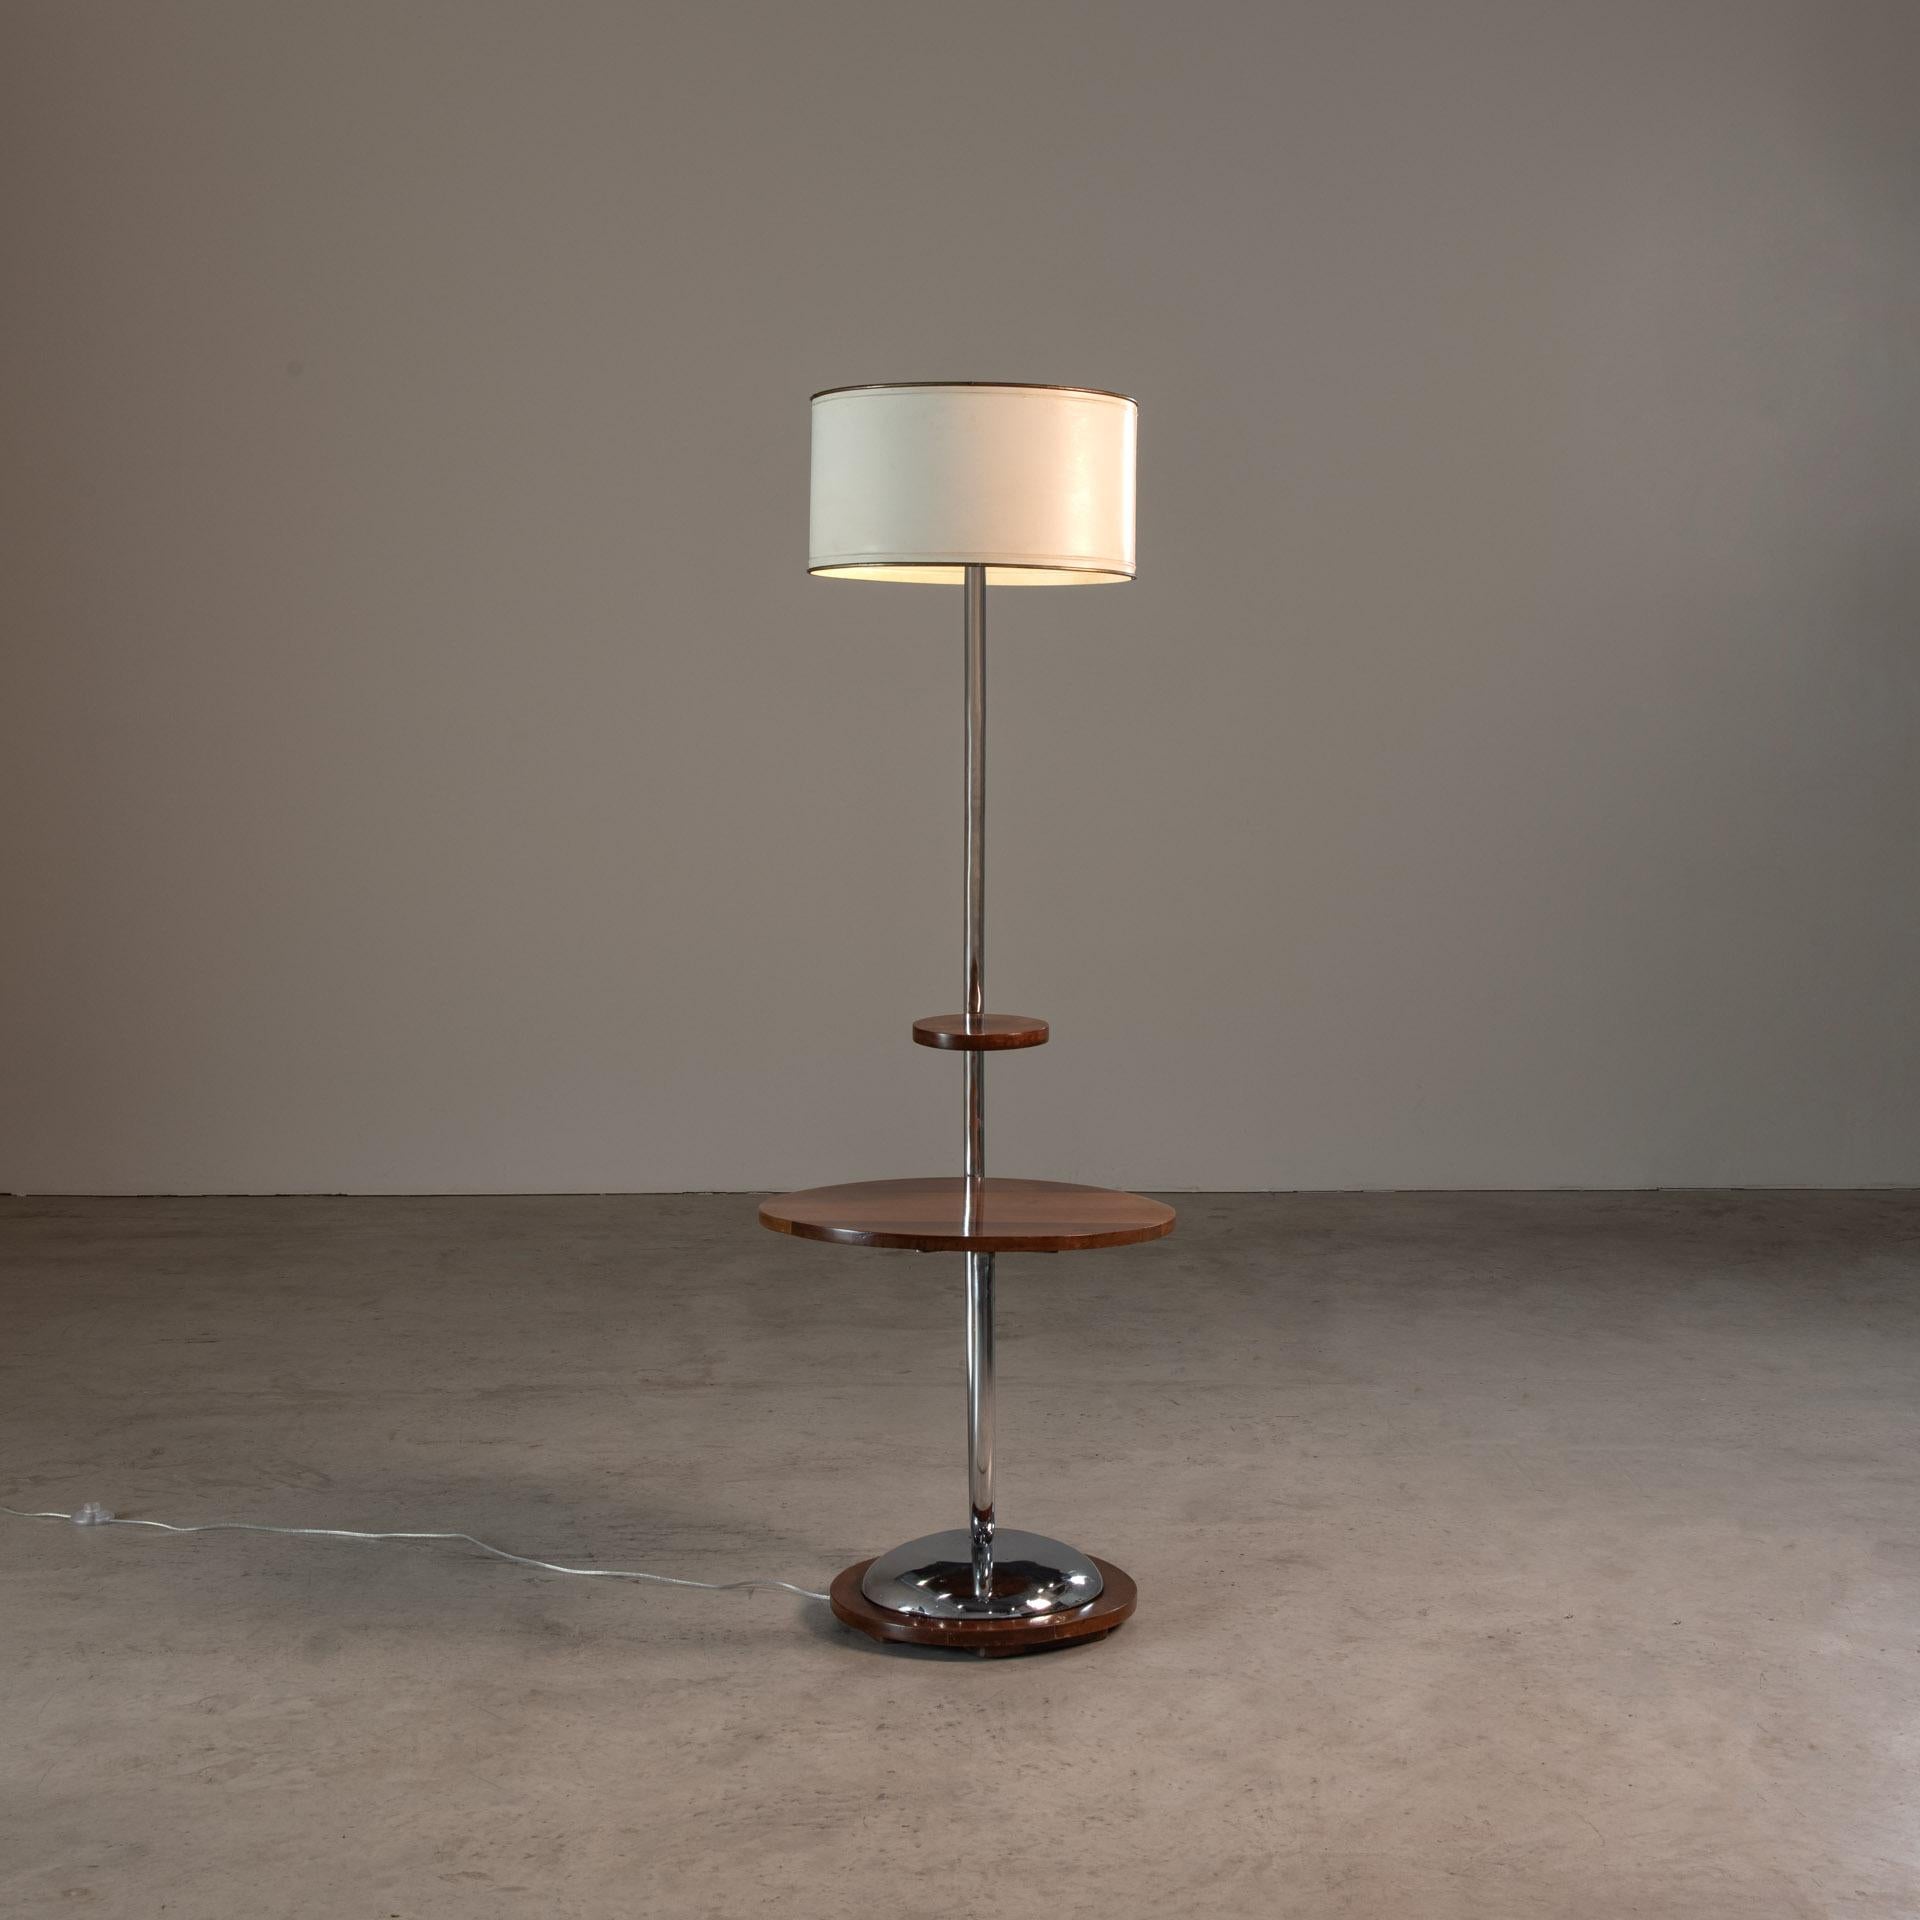 Floor Lamp with Side Table, by John Graz, Brazilian Art Deco In Good Condition For Sale In Sao Paulo, SP